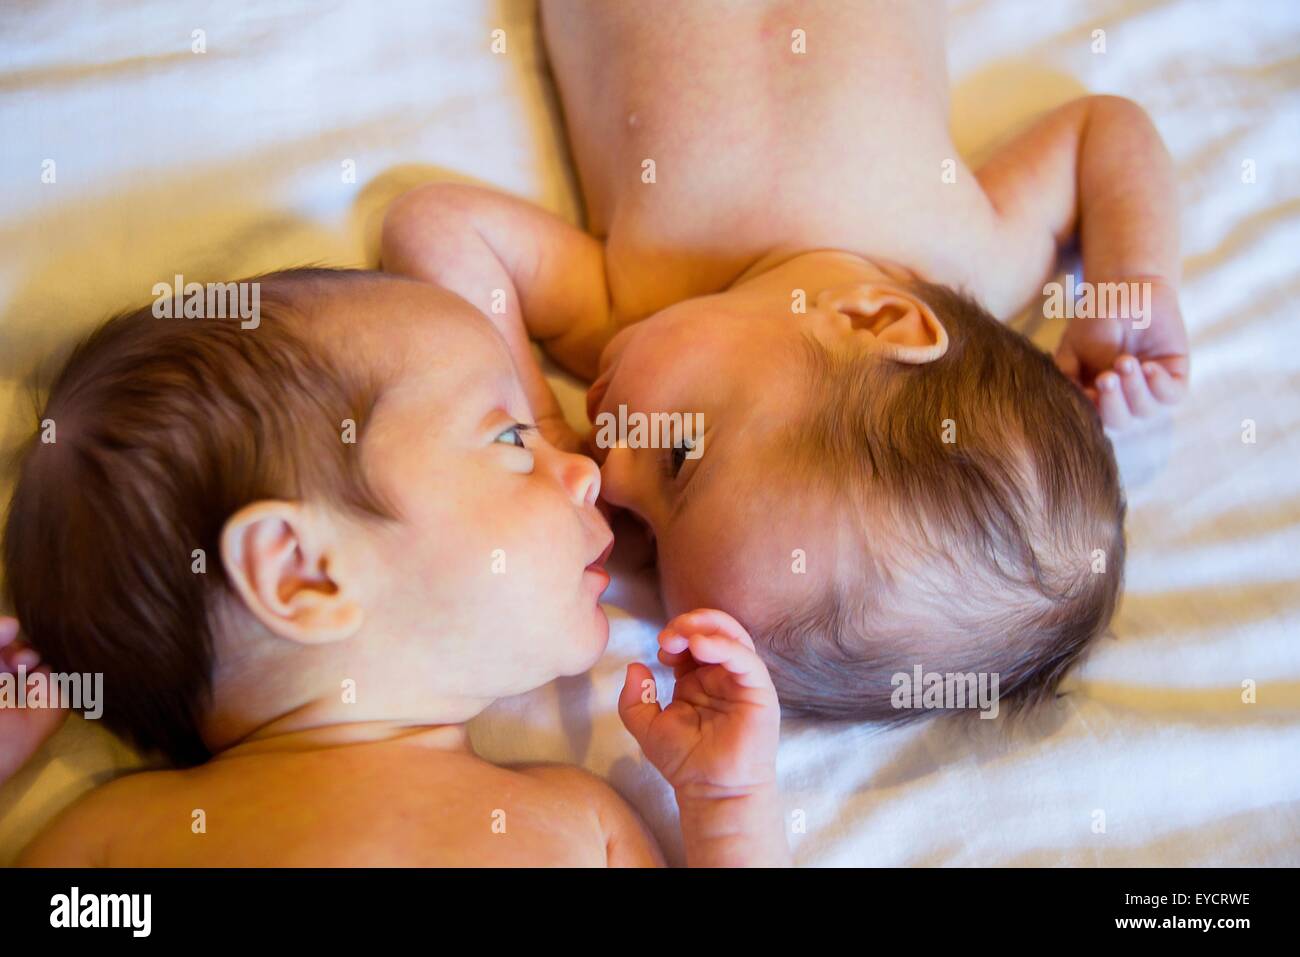 Twin baby sister and brother Stock Photo